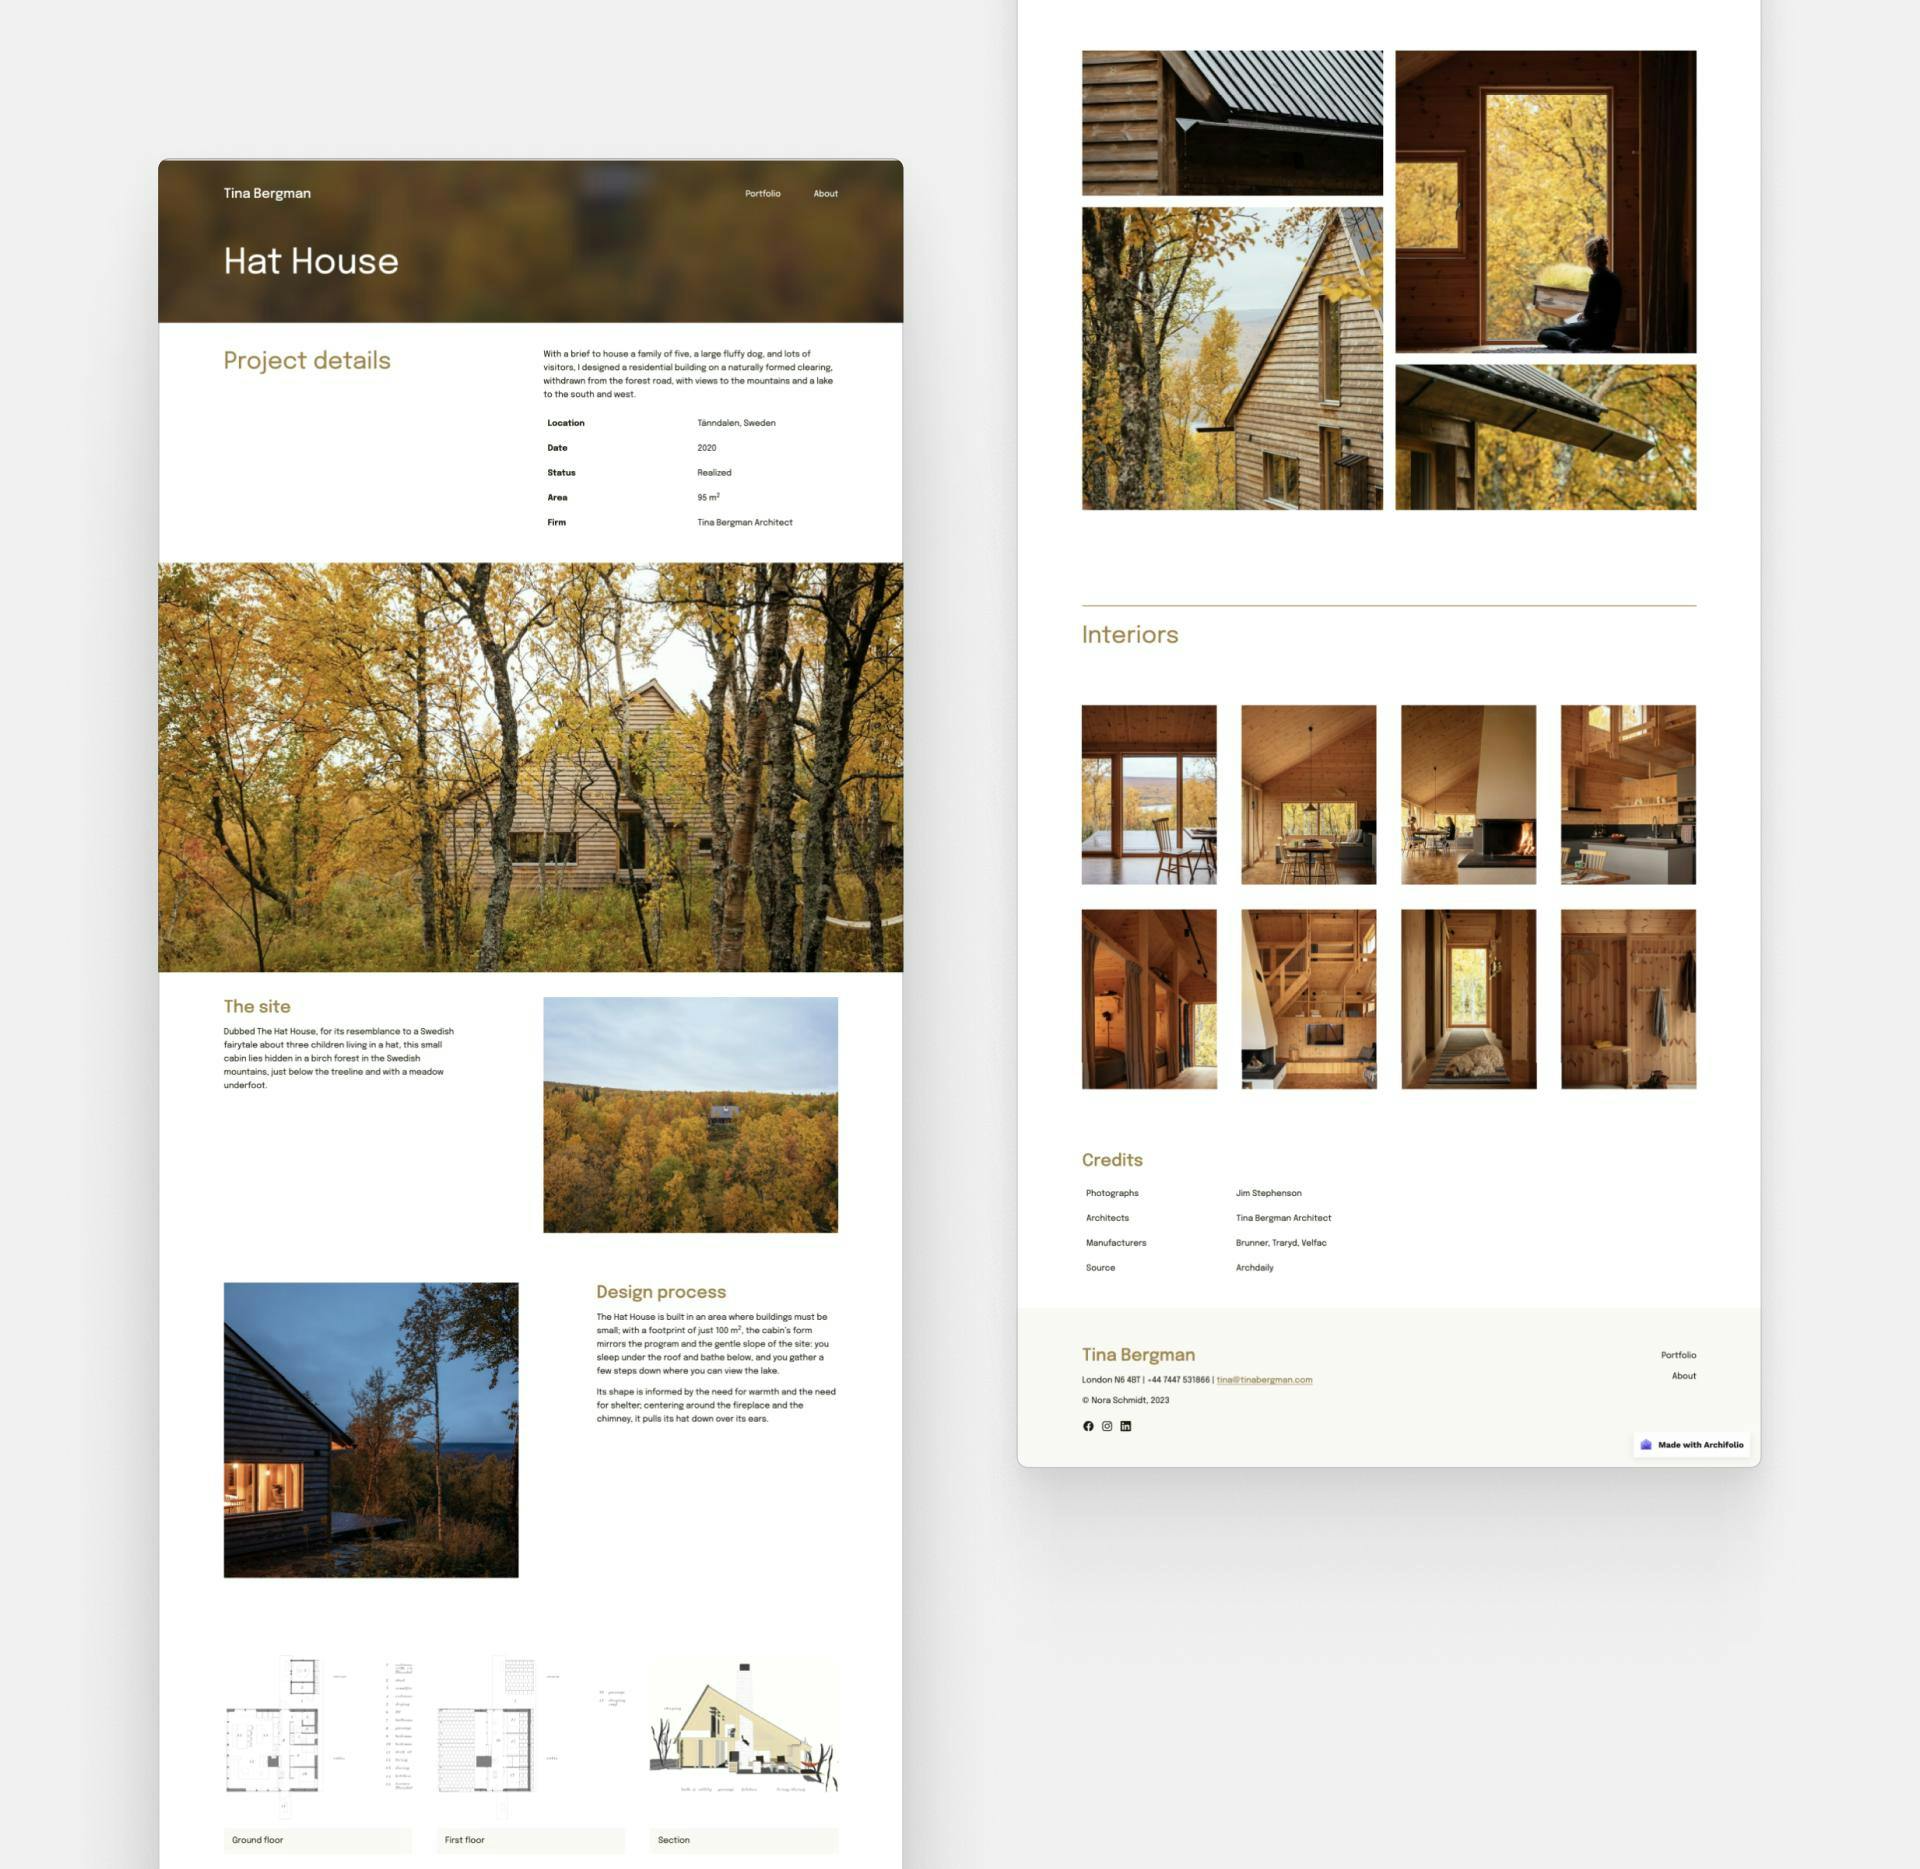 Screenshot of a site created with Archifolio based on Tina Bergman Architects project, the Hat House. Image source: Archdaily